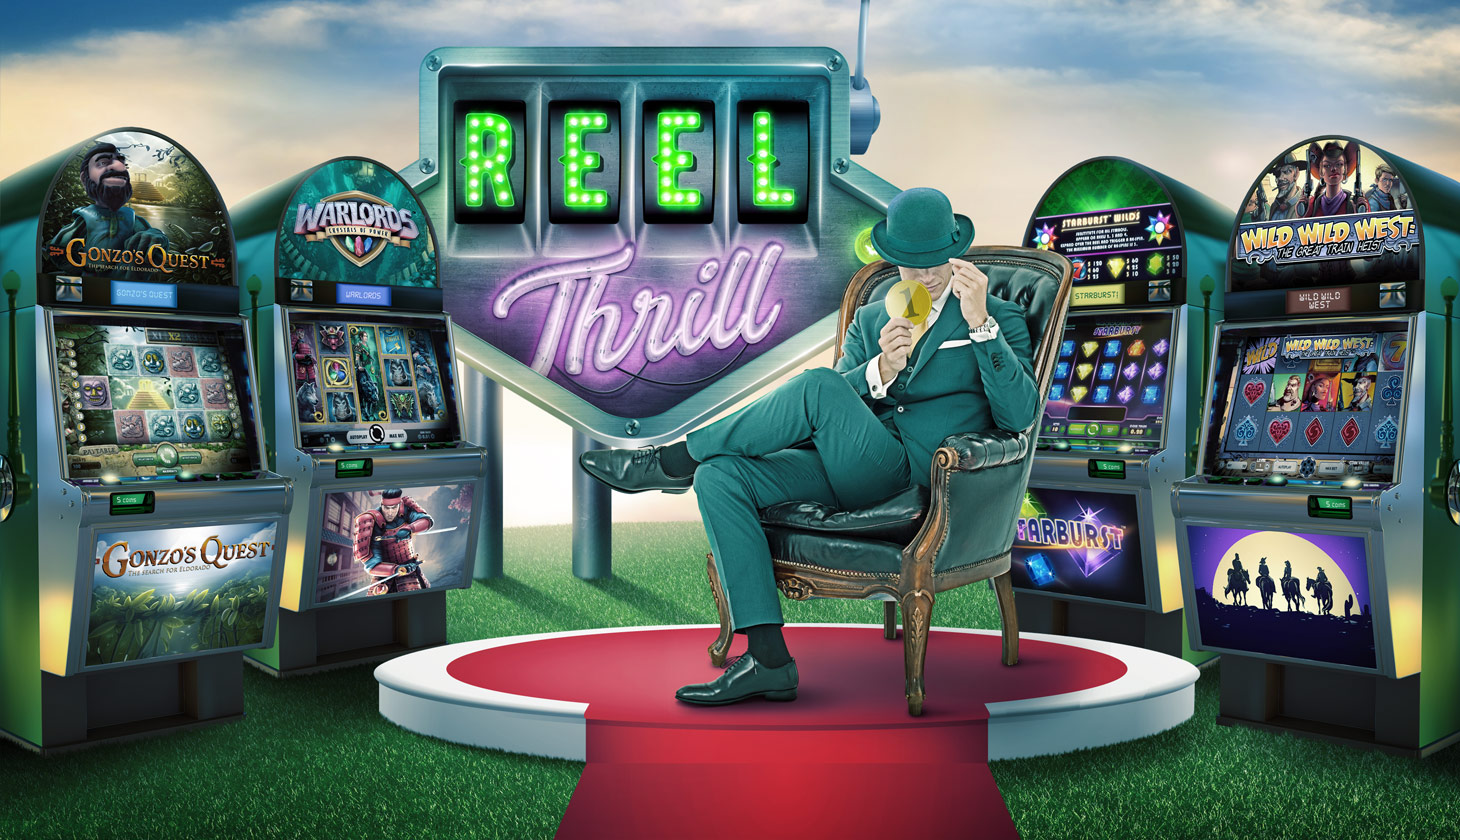 Free Spin Casino Promotions On Mobile At MrGreen.com Online Casino